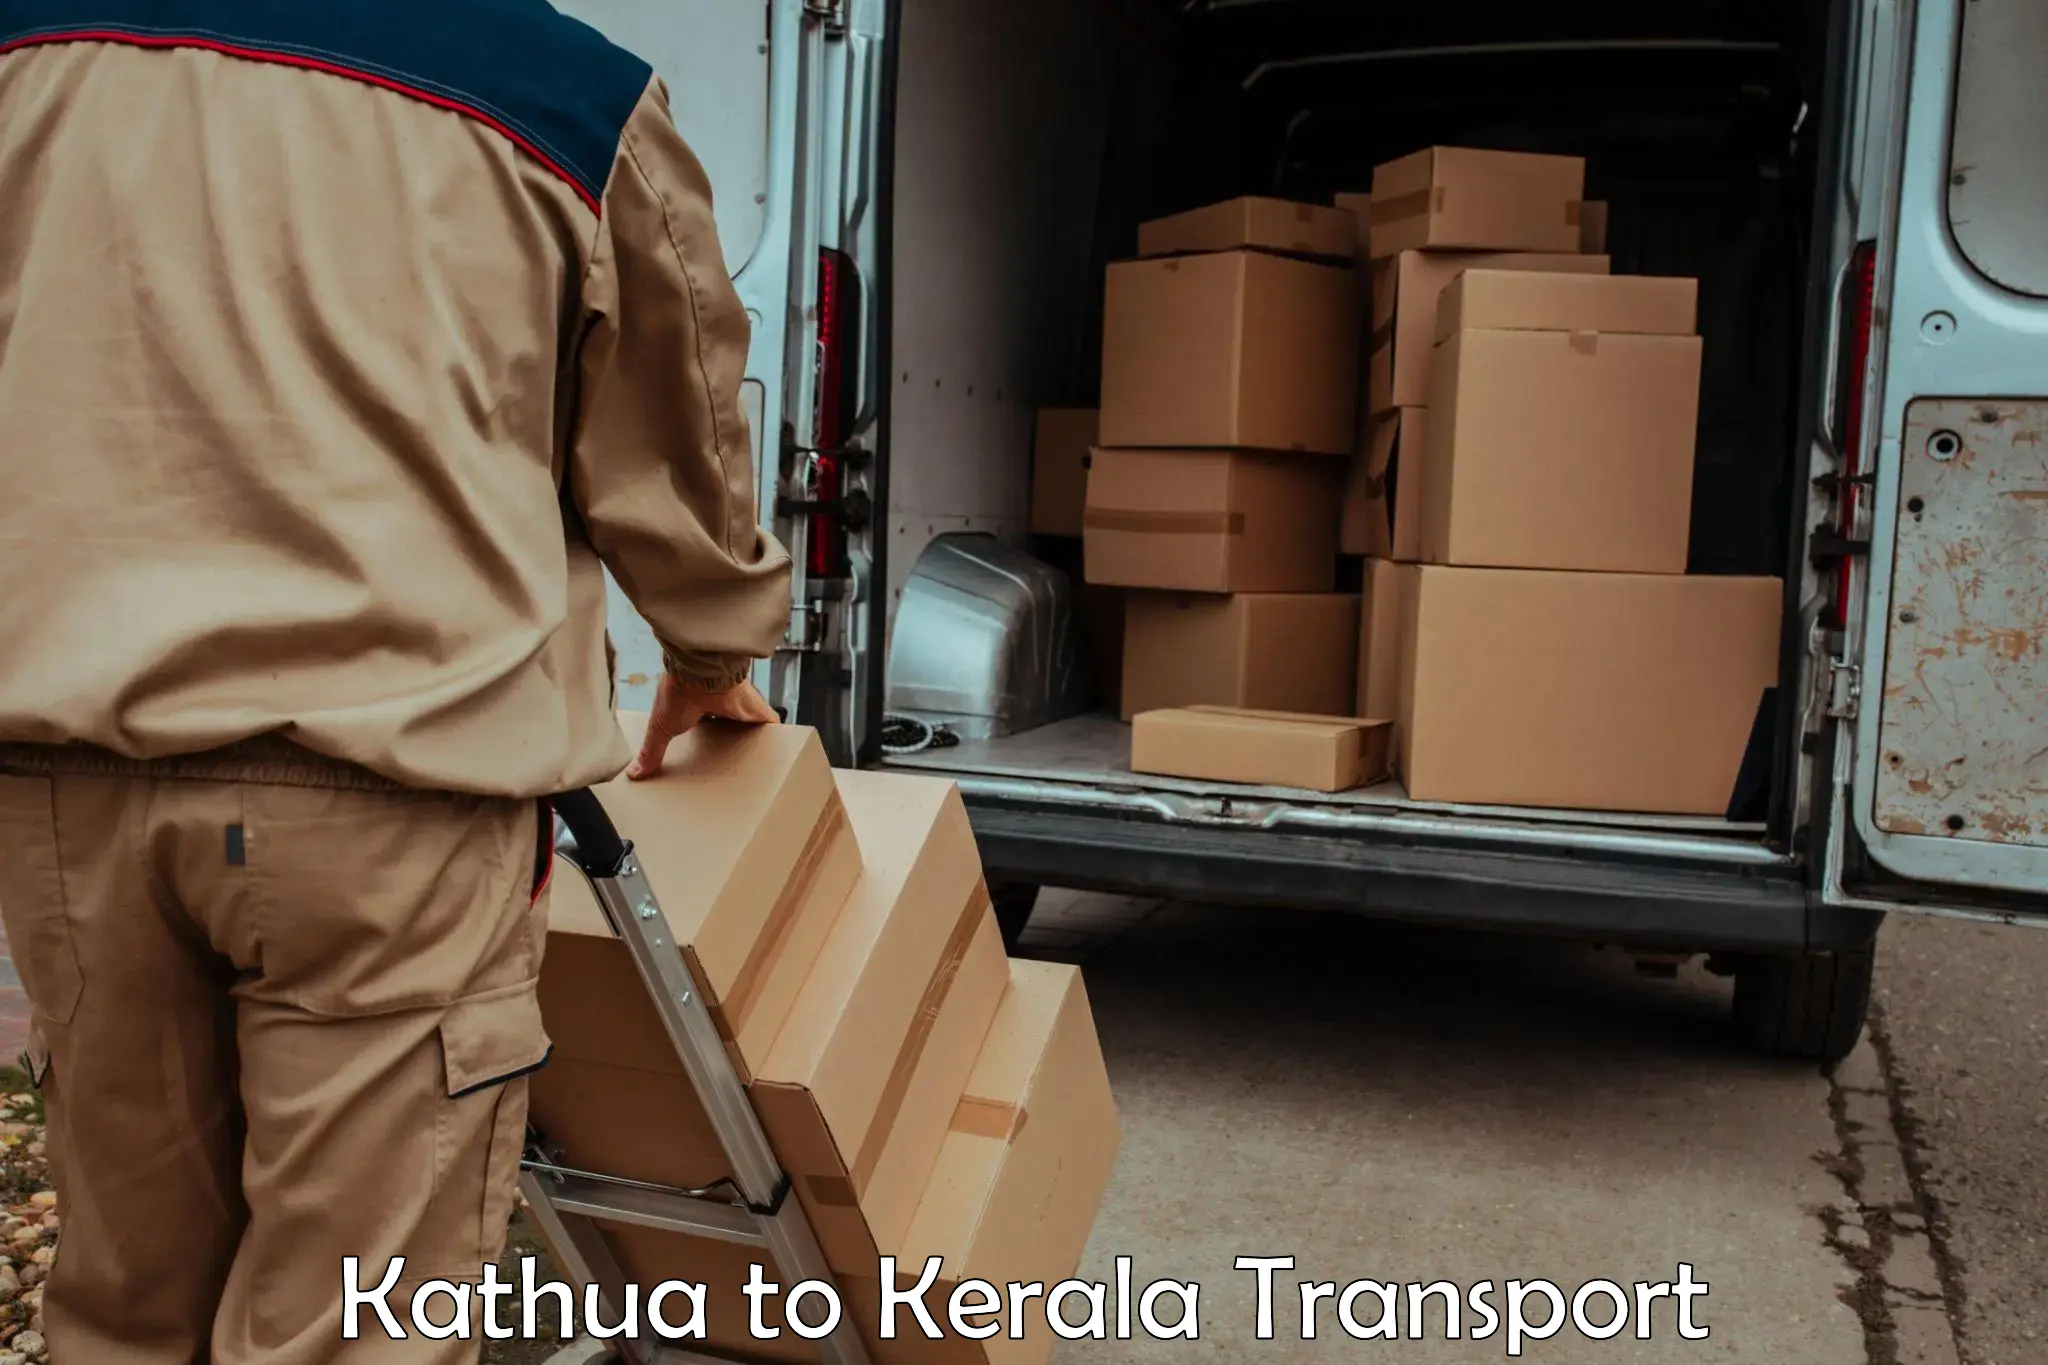 Nationwide transport services Kathua to Cochin University of Science and Technology